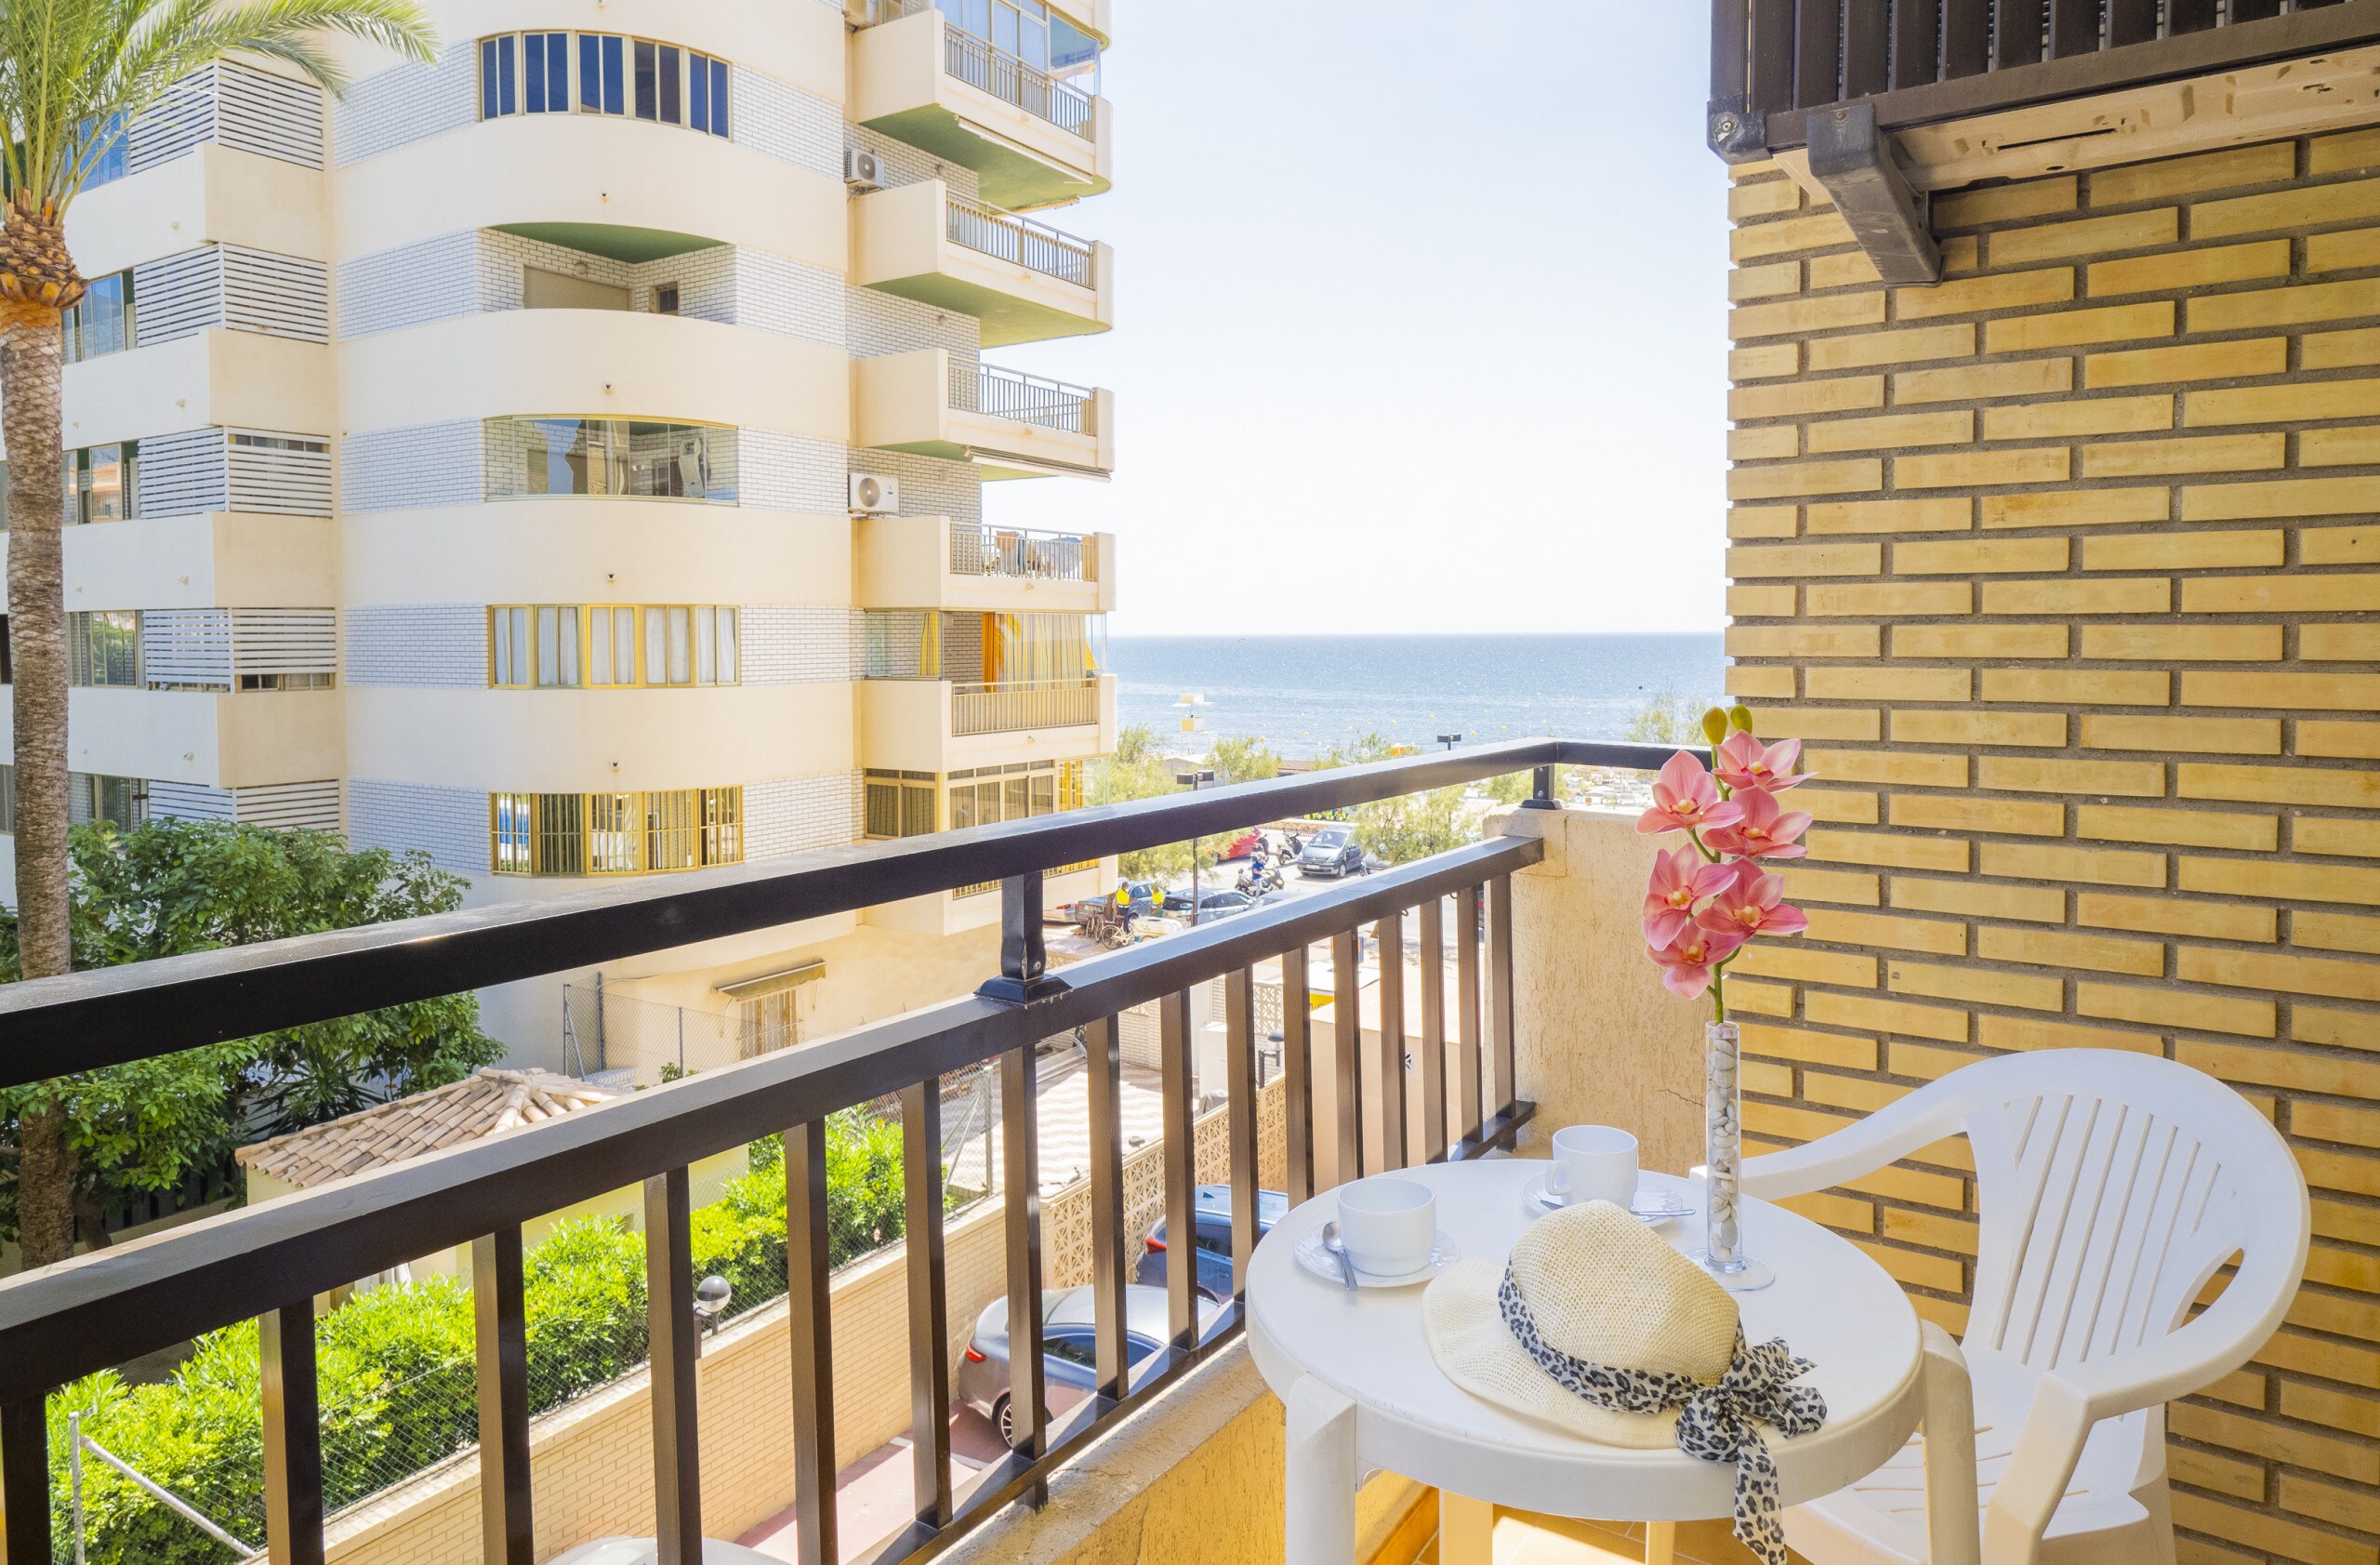 Enjoy the terrace of this apartment in Fuengirola